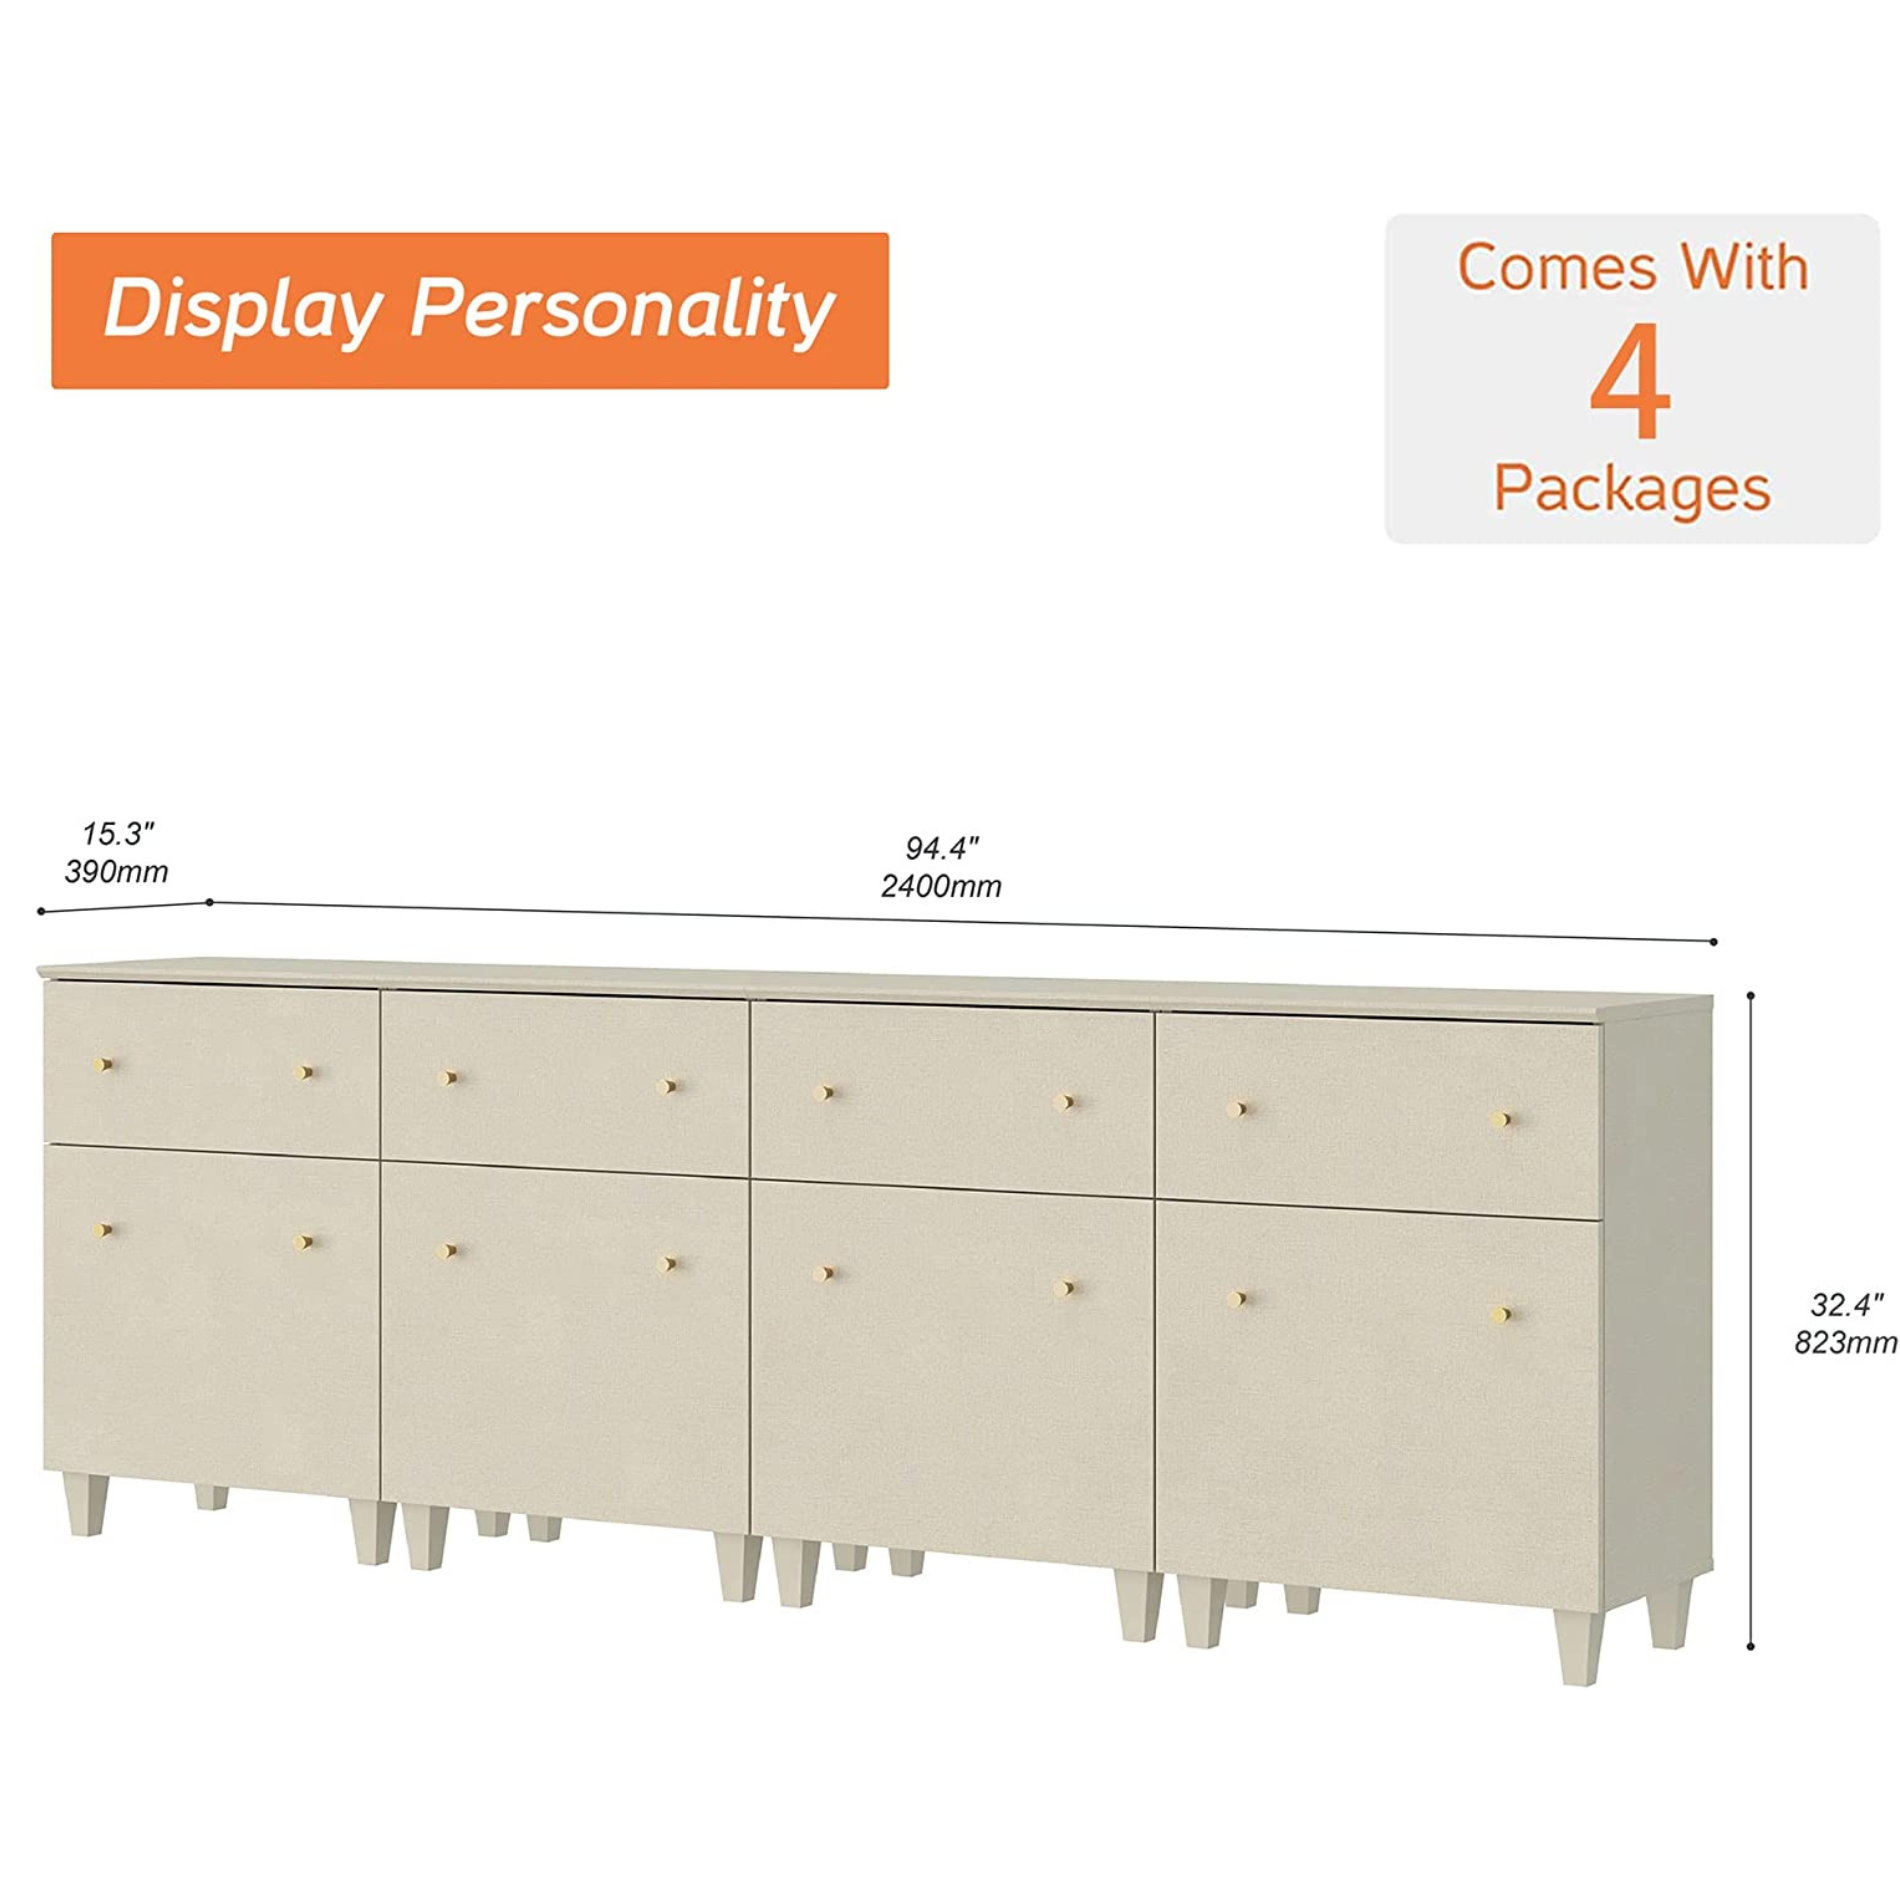 WAMPAT 94.4" Storage Cabinets for Living Room, 4-in-1 Kitchen Sideboards with Drawers and Doors, Beige Accent Cabinets for Hallway, 4 Packs